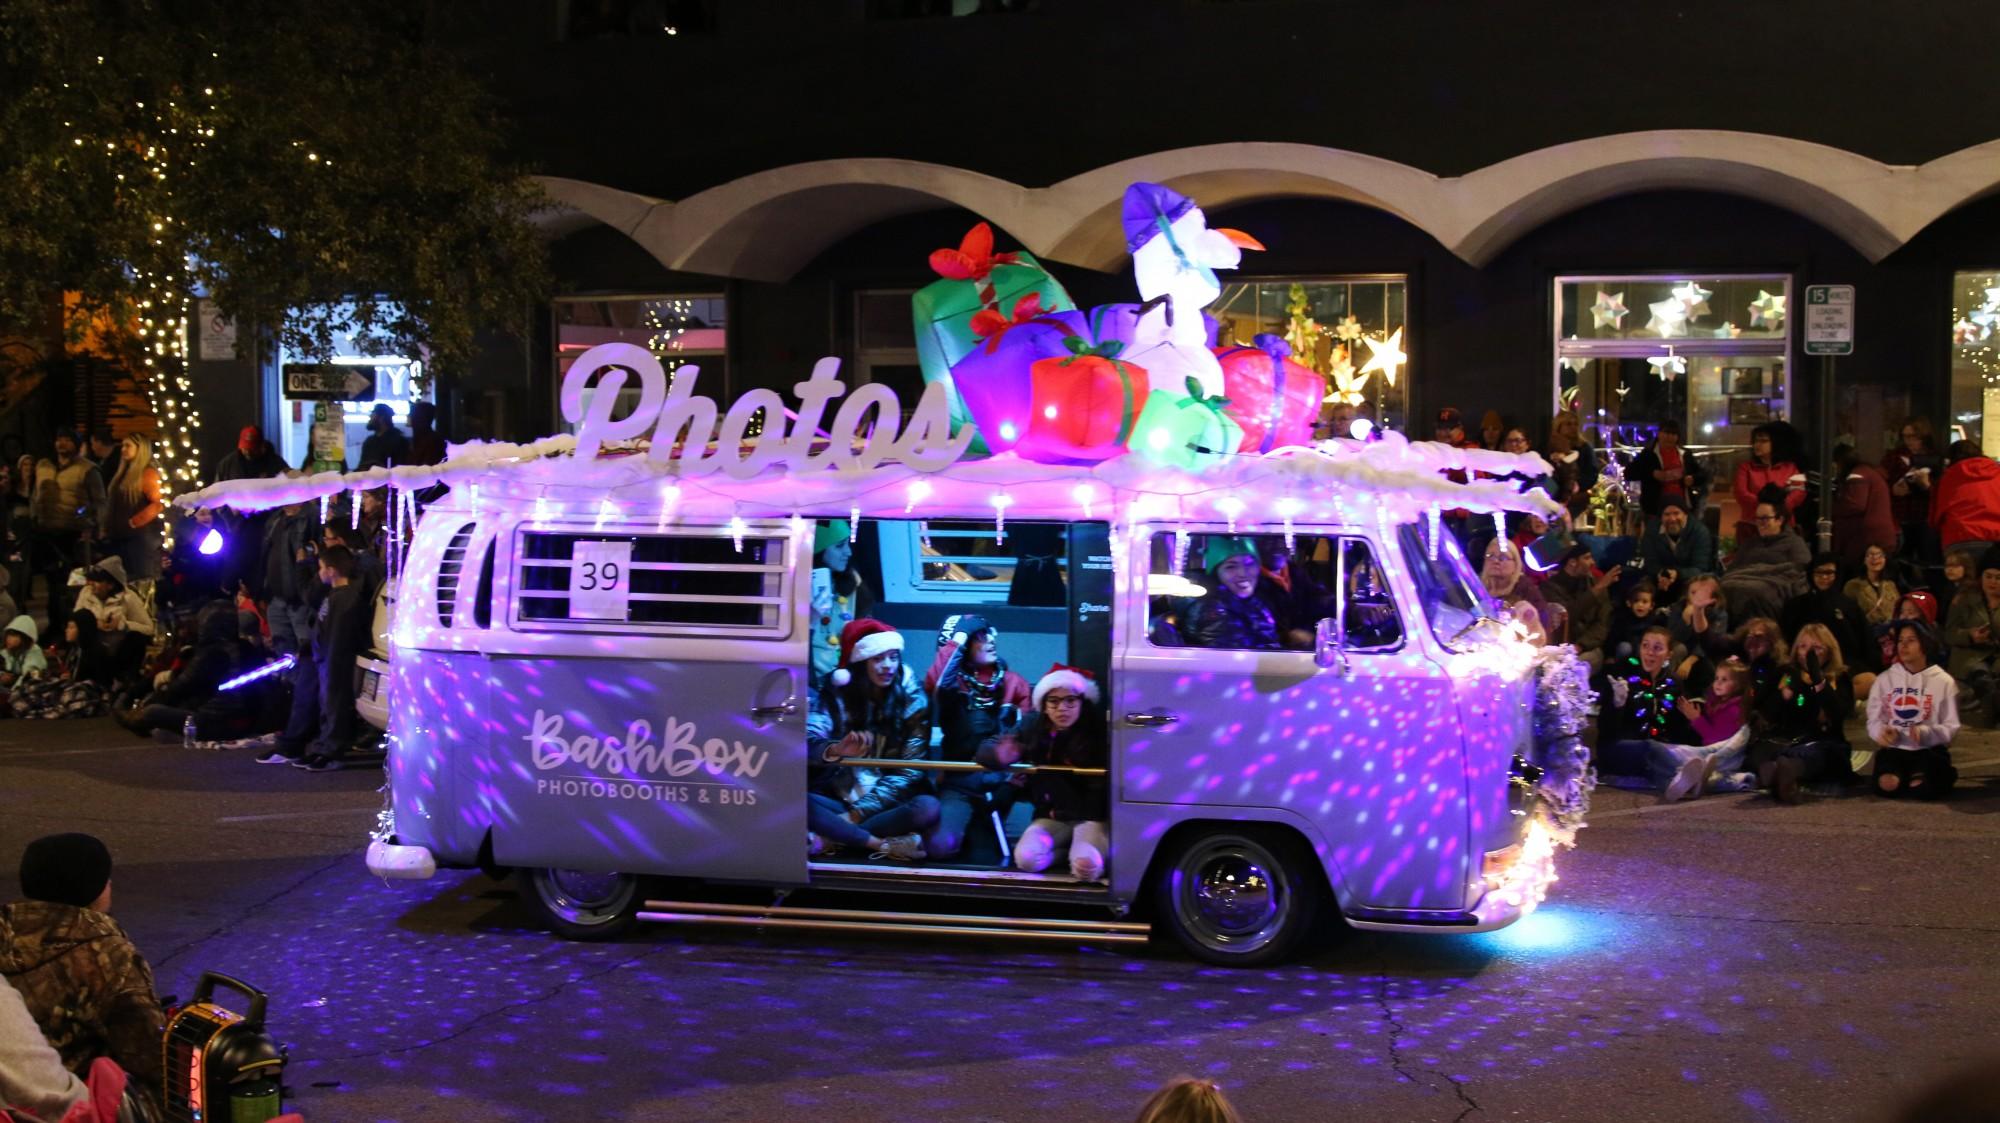  Local business Bashbox Photobooths & Bus, decorated their 1970 VW bus for the parade on Nov. 30. The company’s VW bus has a photobooth inside, which they offer to be used for photo services at events. 
